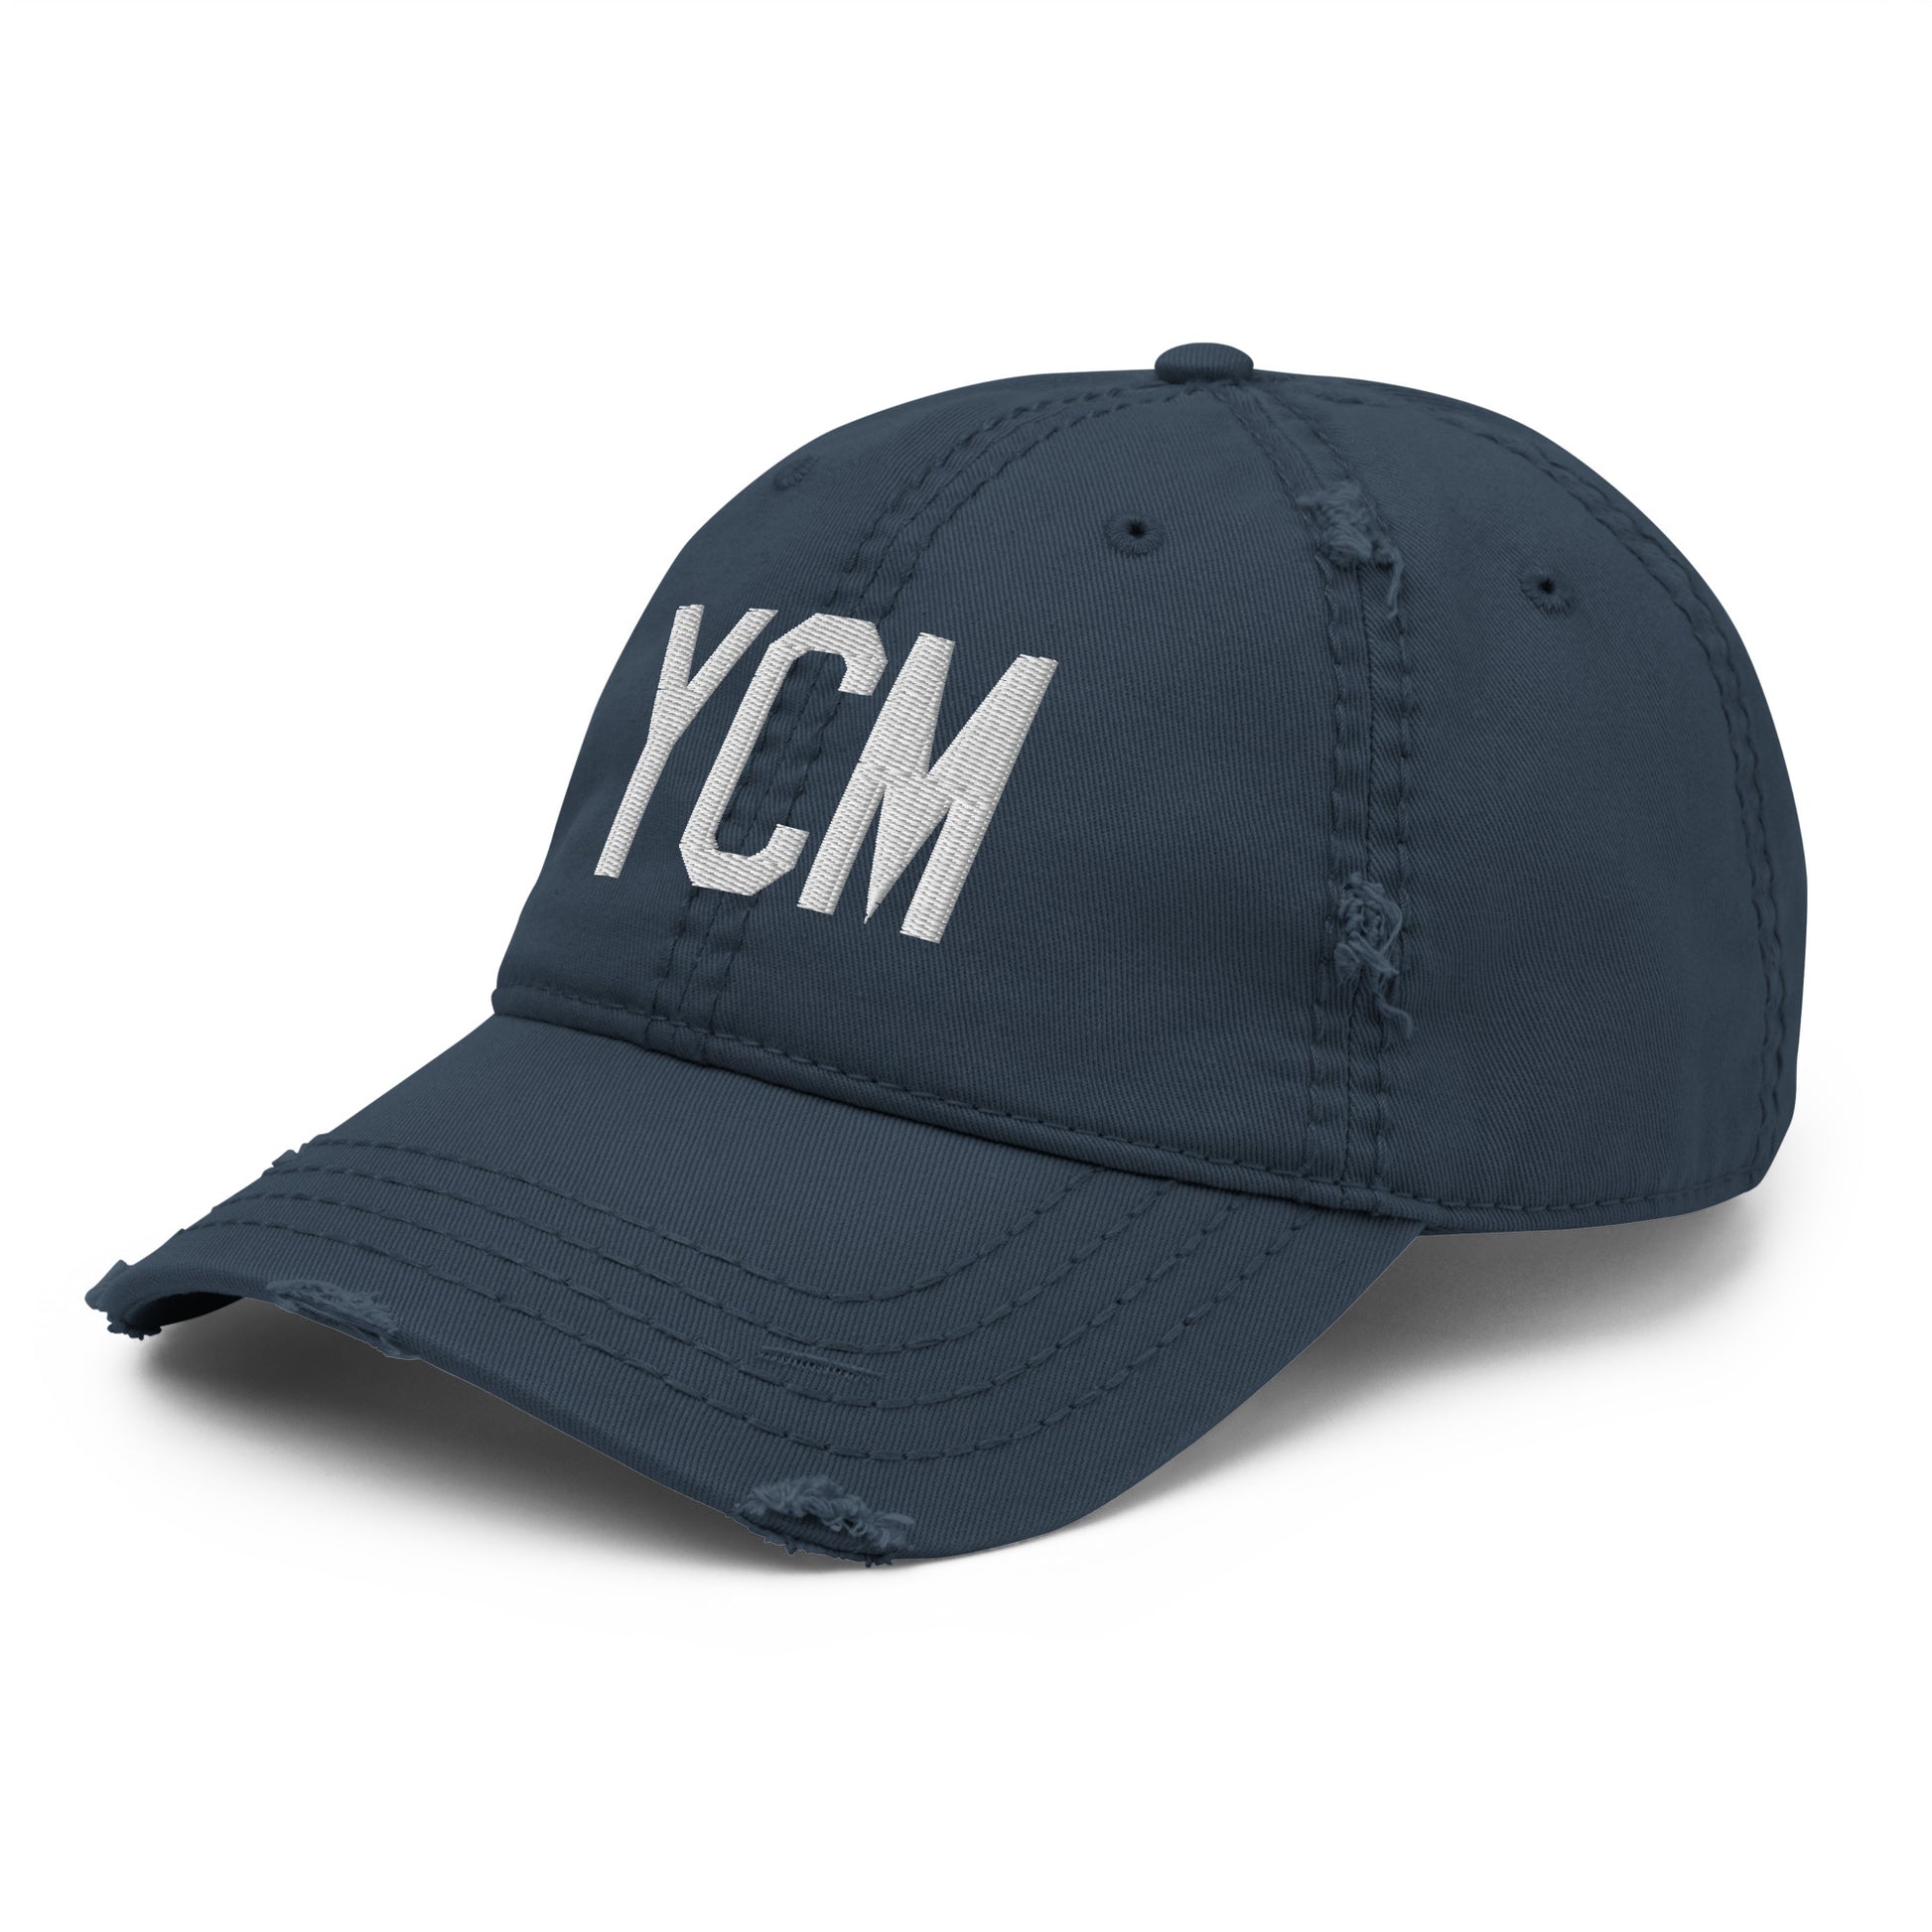 Airport Code Distressed Hat - White • YCM St. Catharines • YHM Designs - Image 01